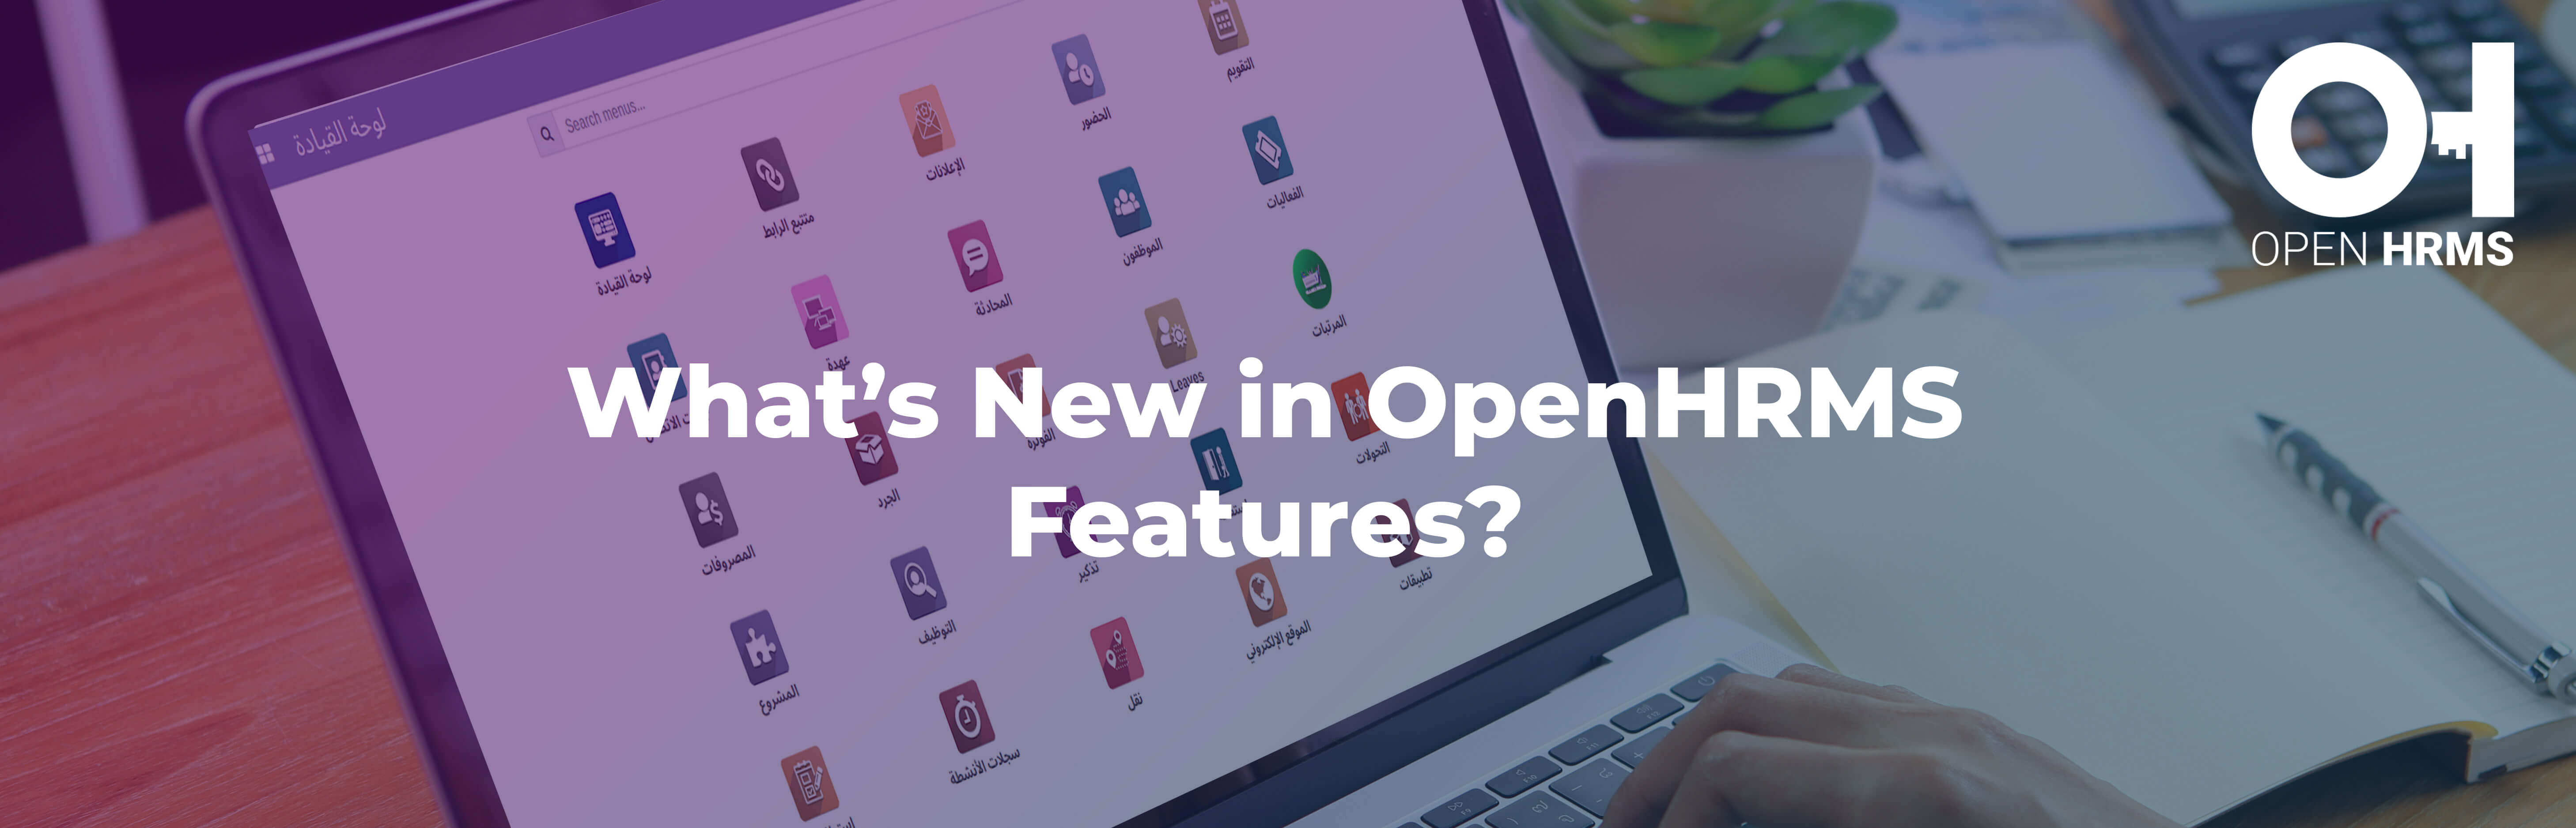 whats-new-in-openhrms-features.jpg